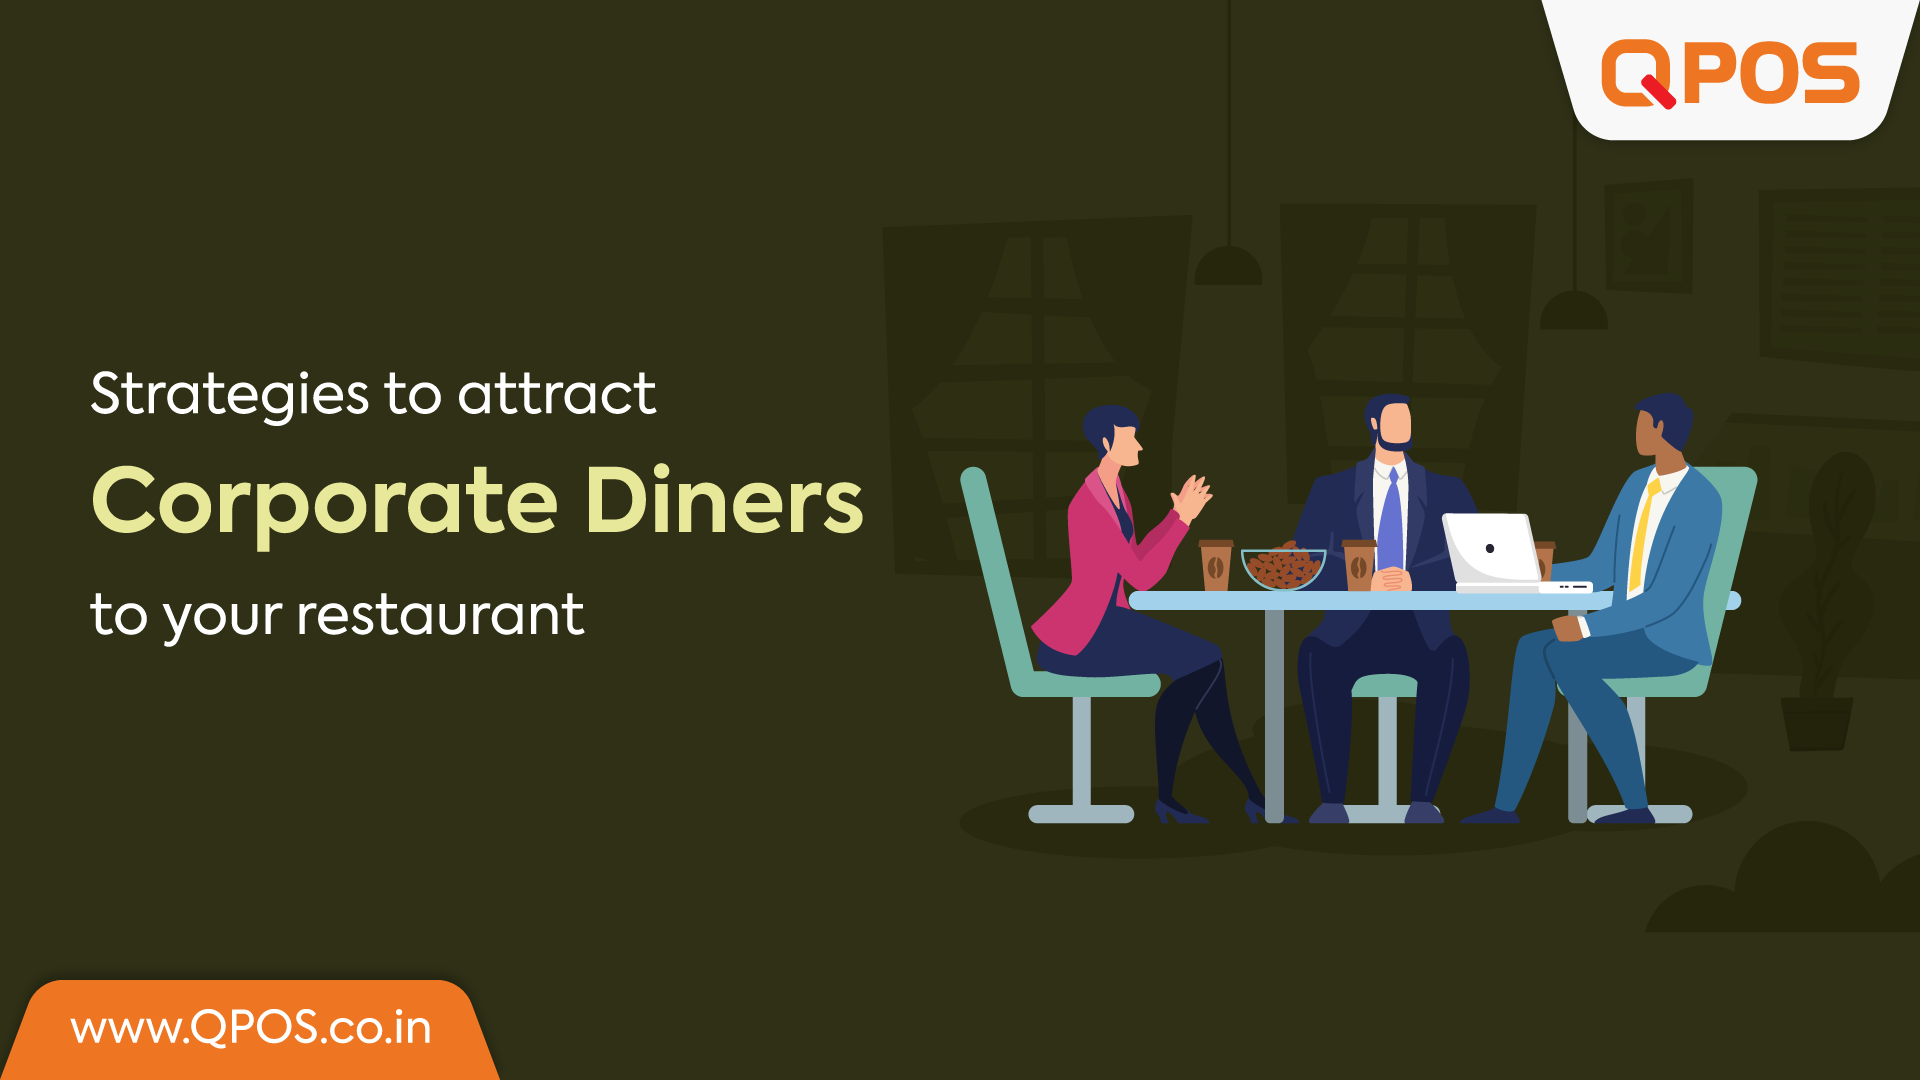 Strategies to Attract Corporate Diners to Your Restaurant